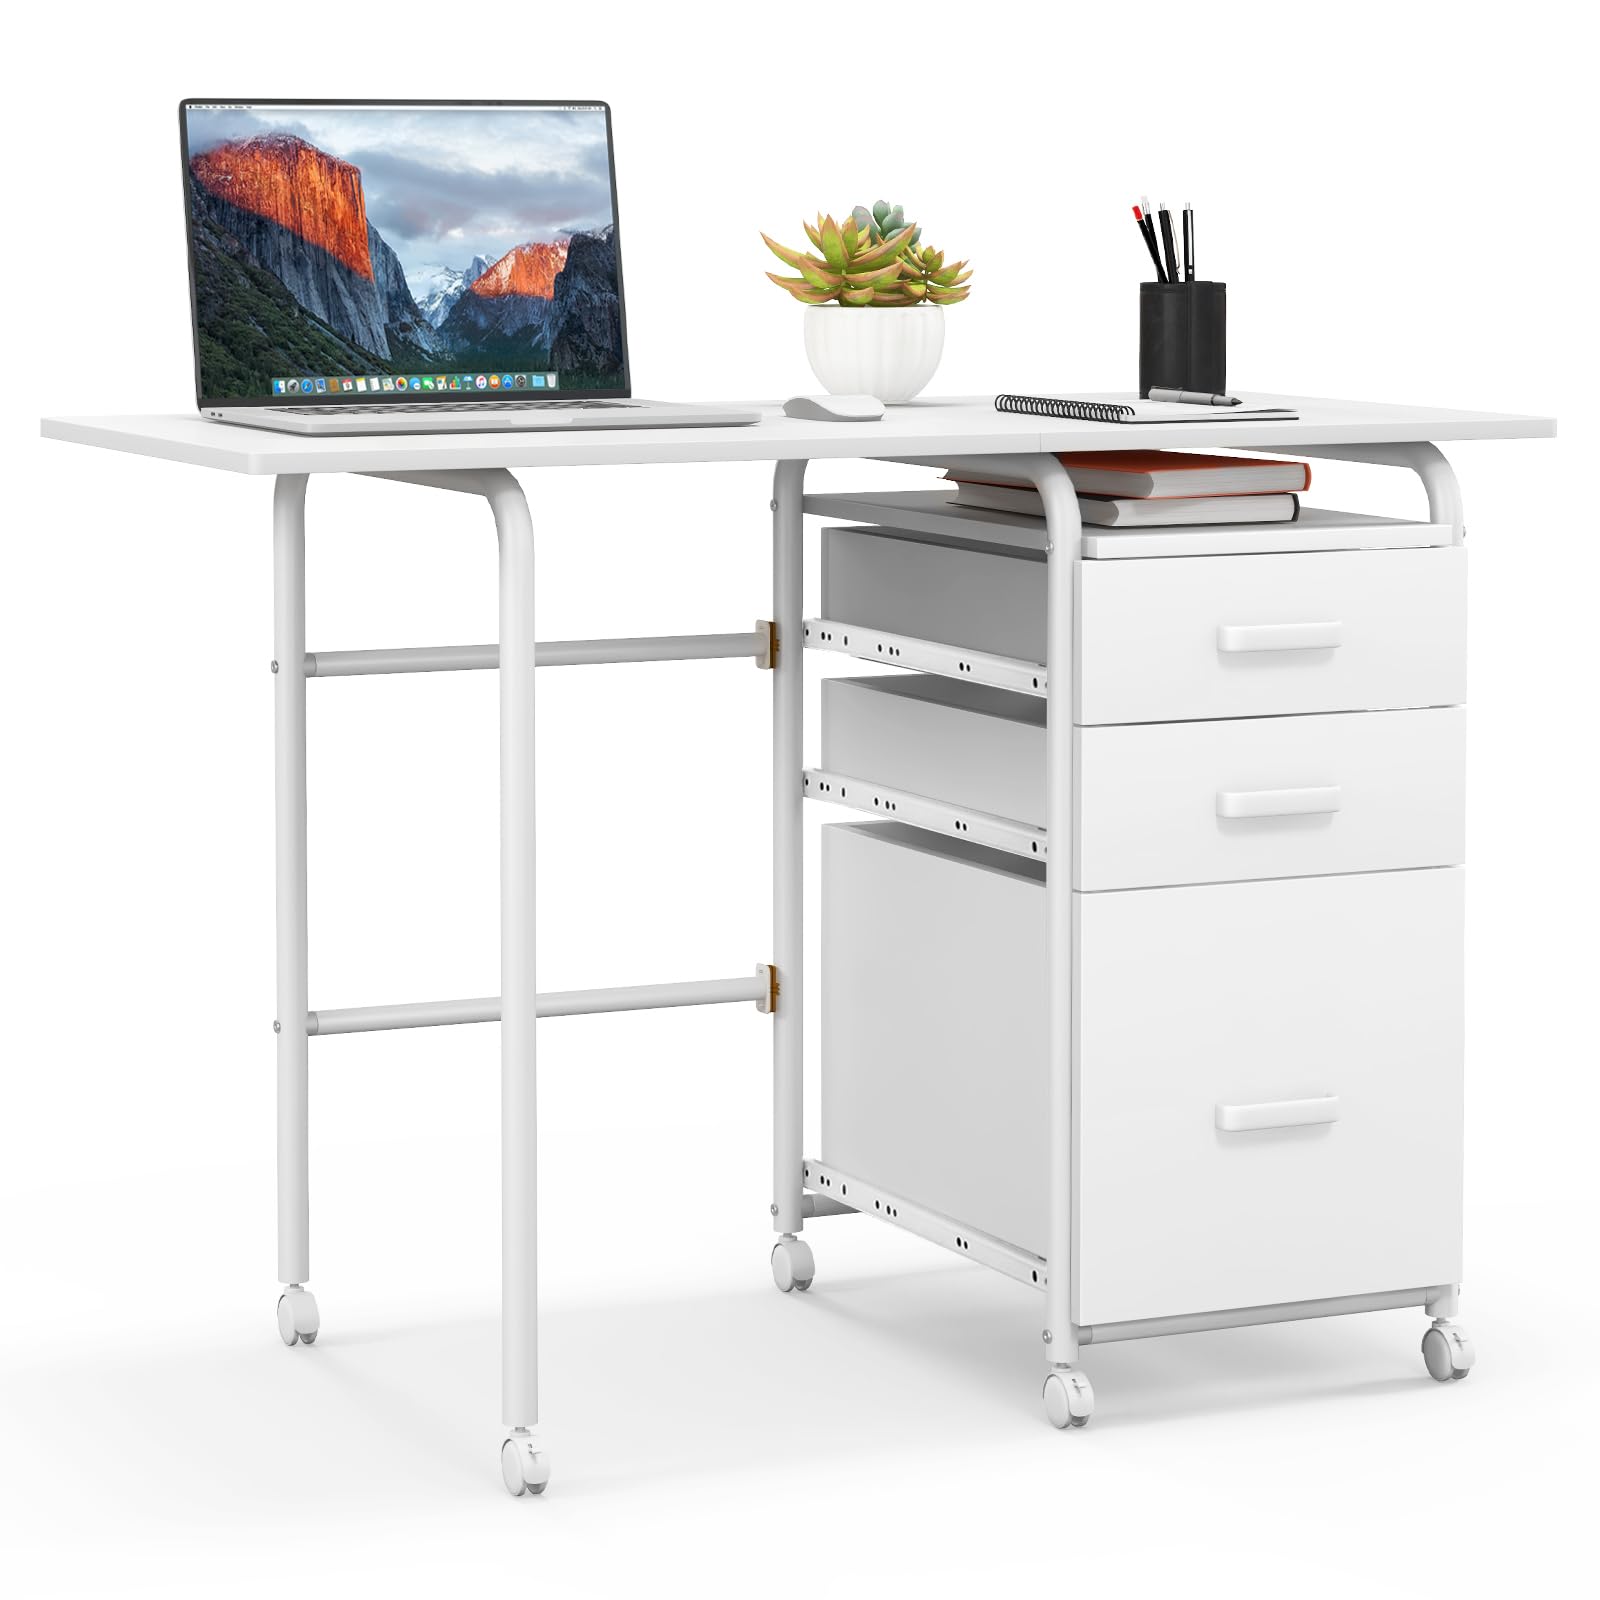 Giantex Folding Desk for Small Space, Rolling Home Office Desk with 3 Drawers & Lockable Universal Wheels